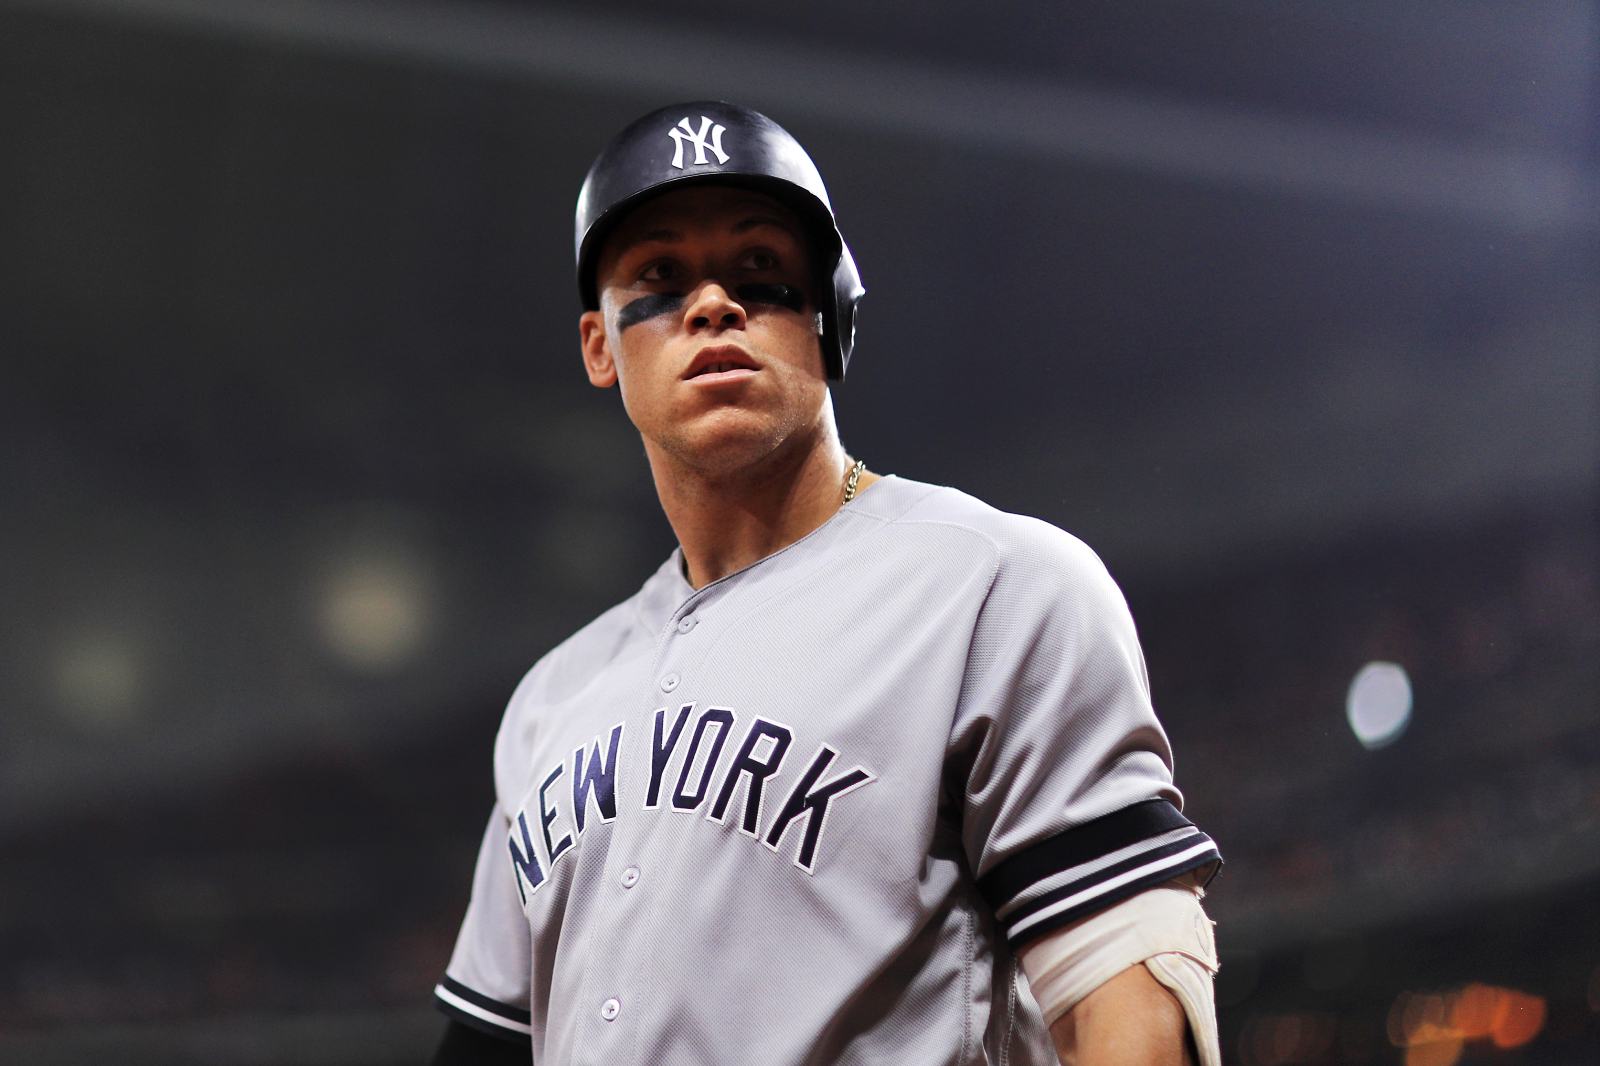 Aaron Judge has ultimately become a superstar for the New York Yankees over the past few years. So, what is Judge's net worth?